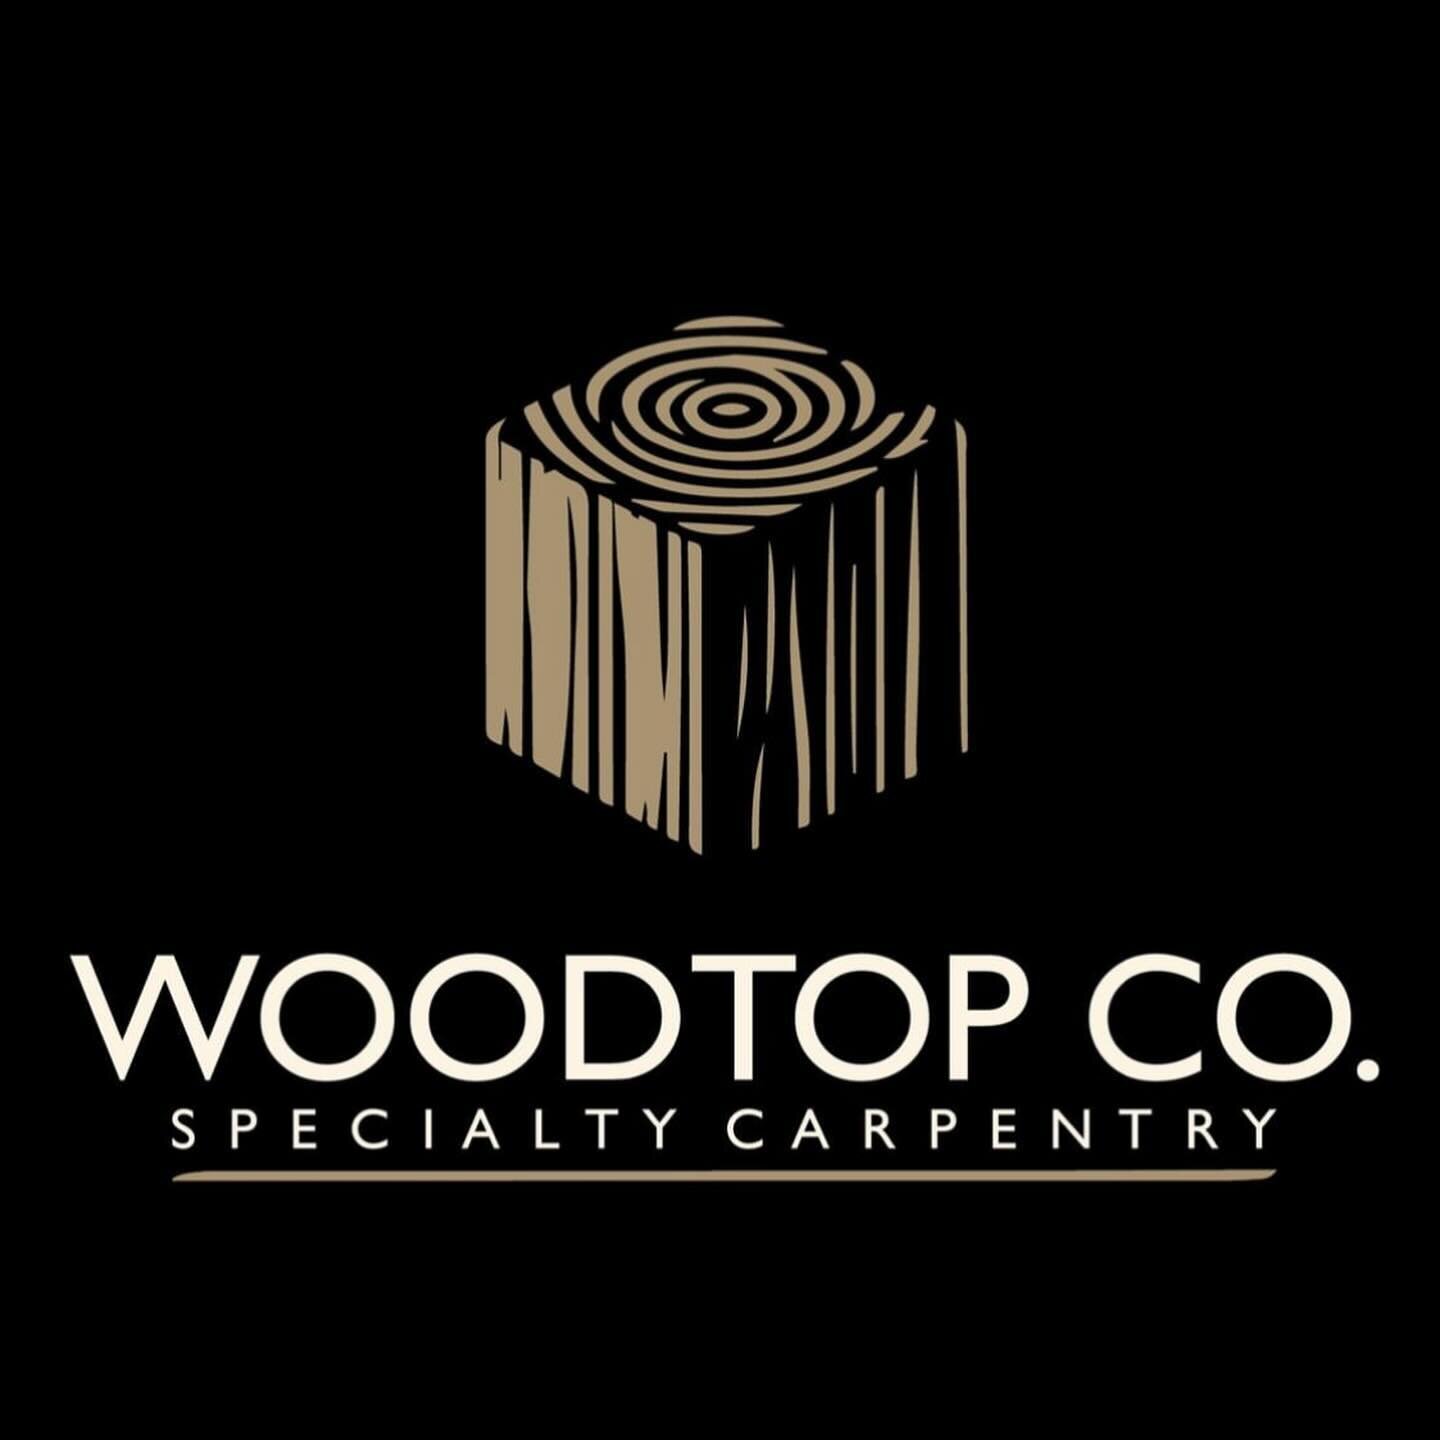 Branding for a new construction client! @woodtop.co 

Check them out!